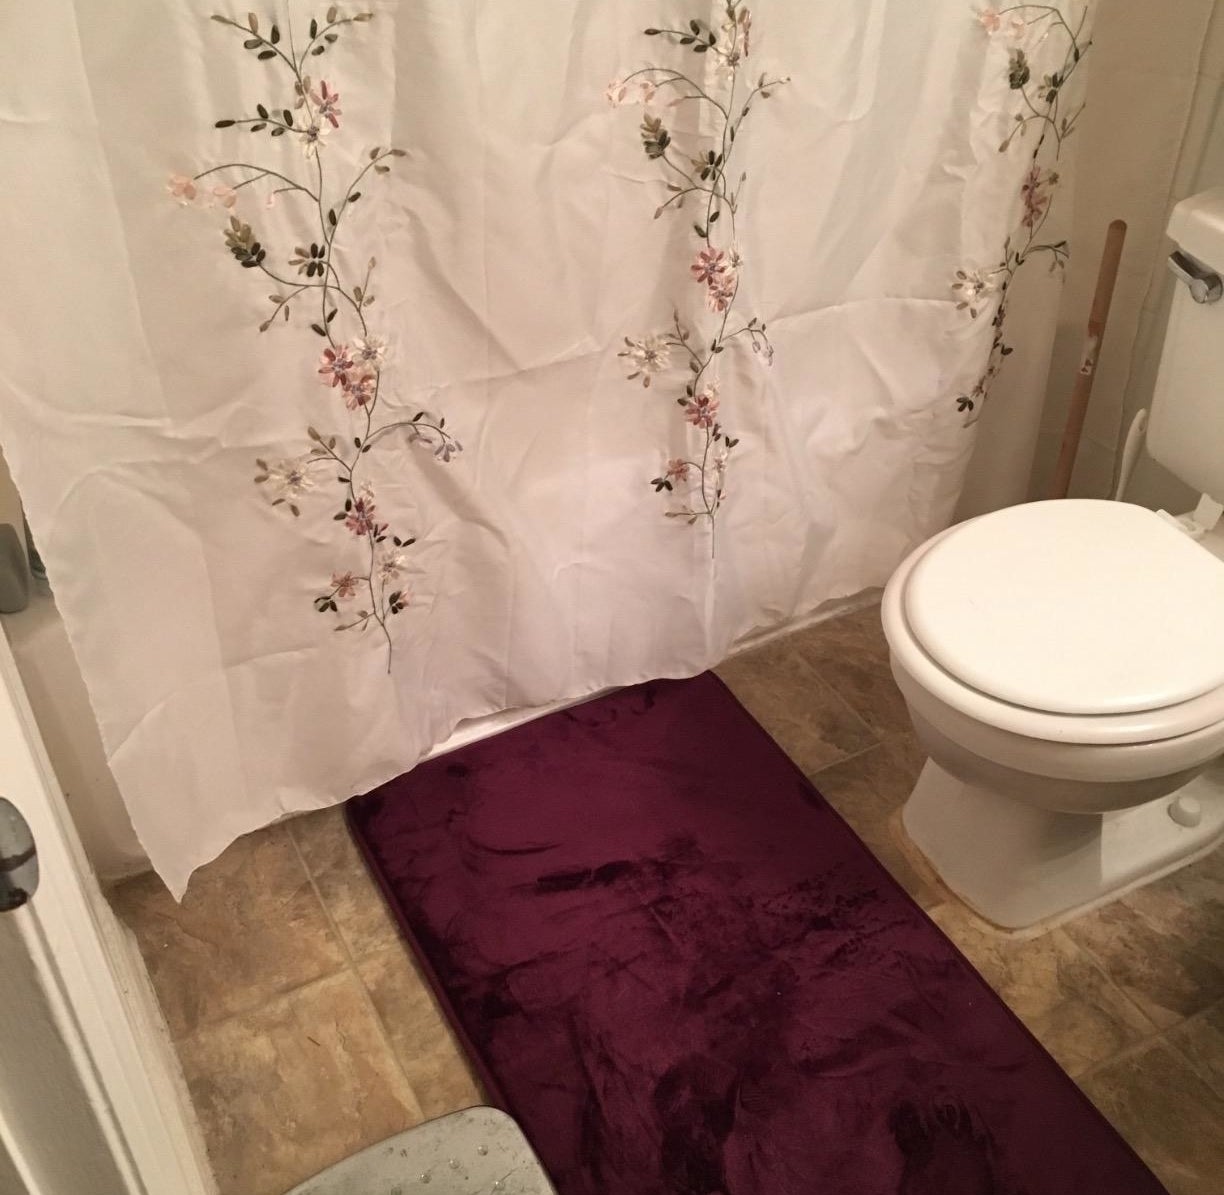 Review photo of the eggplant bath mat